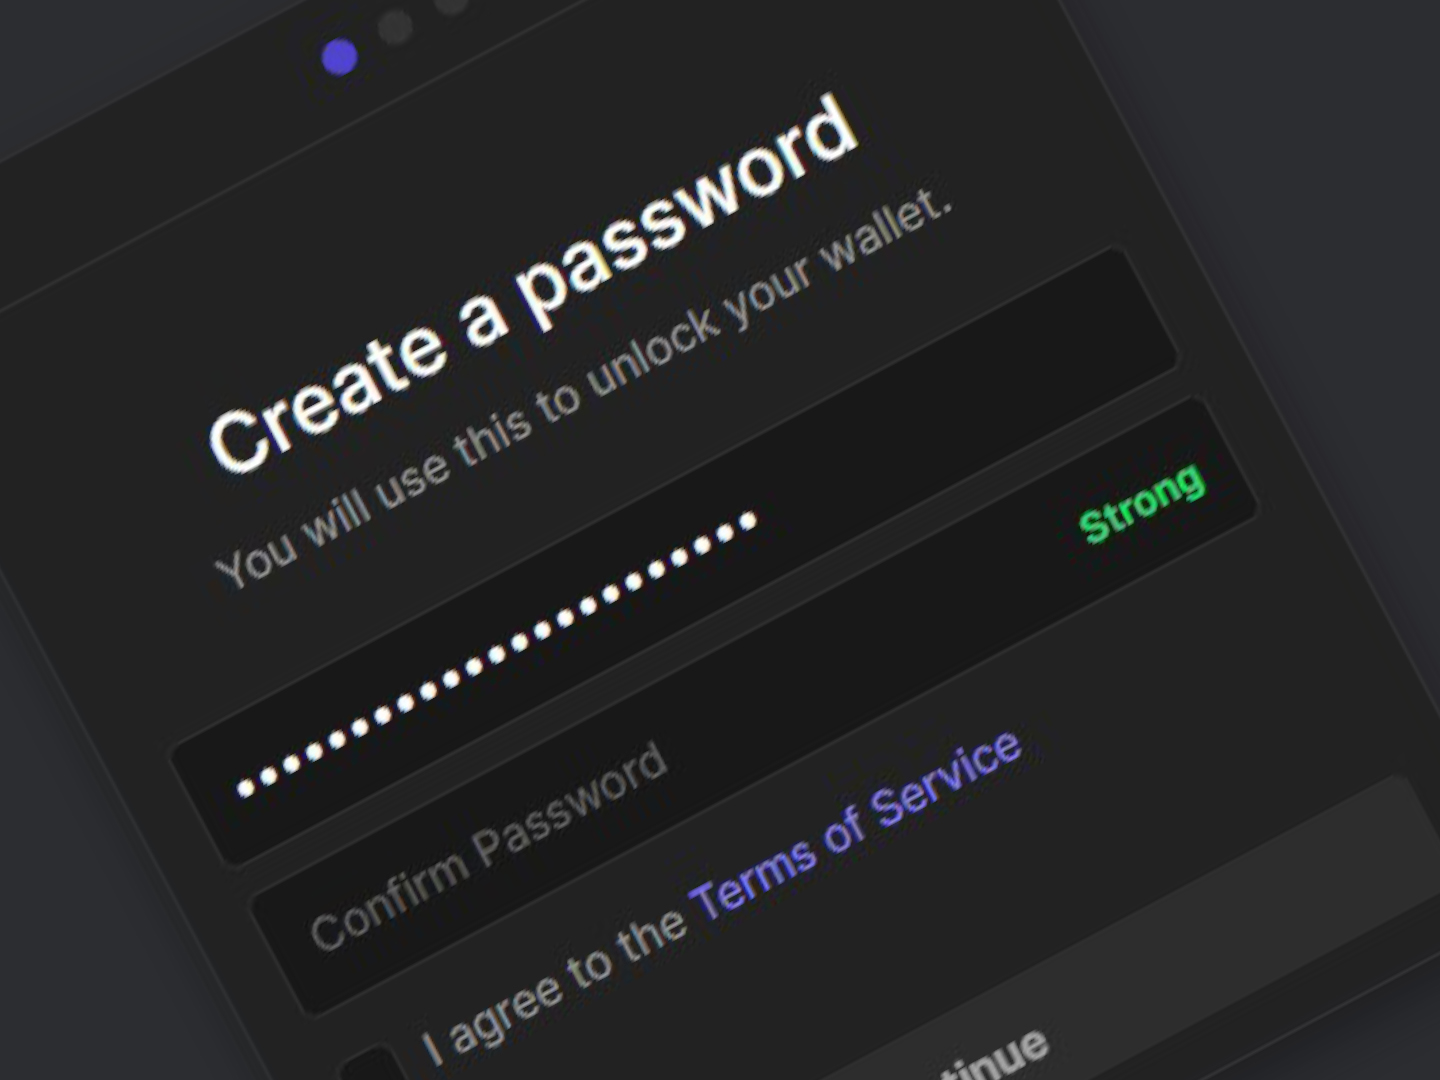 1Password Adds 1-Click Credential Storage for Solana-Based Phantom Wallet Users